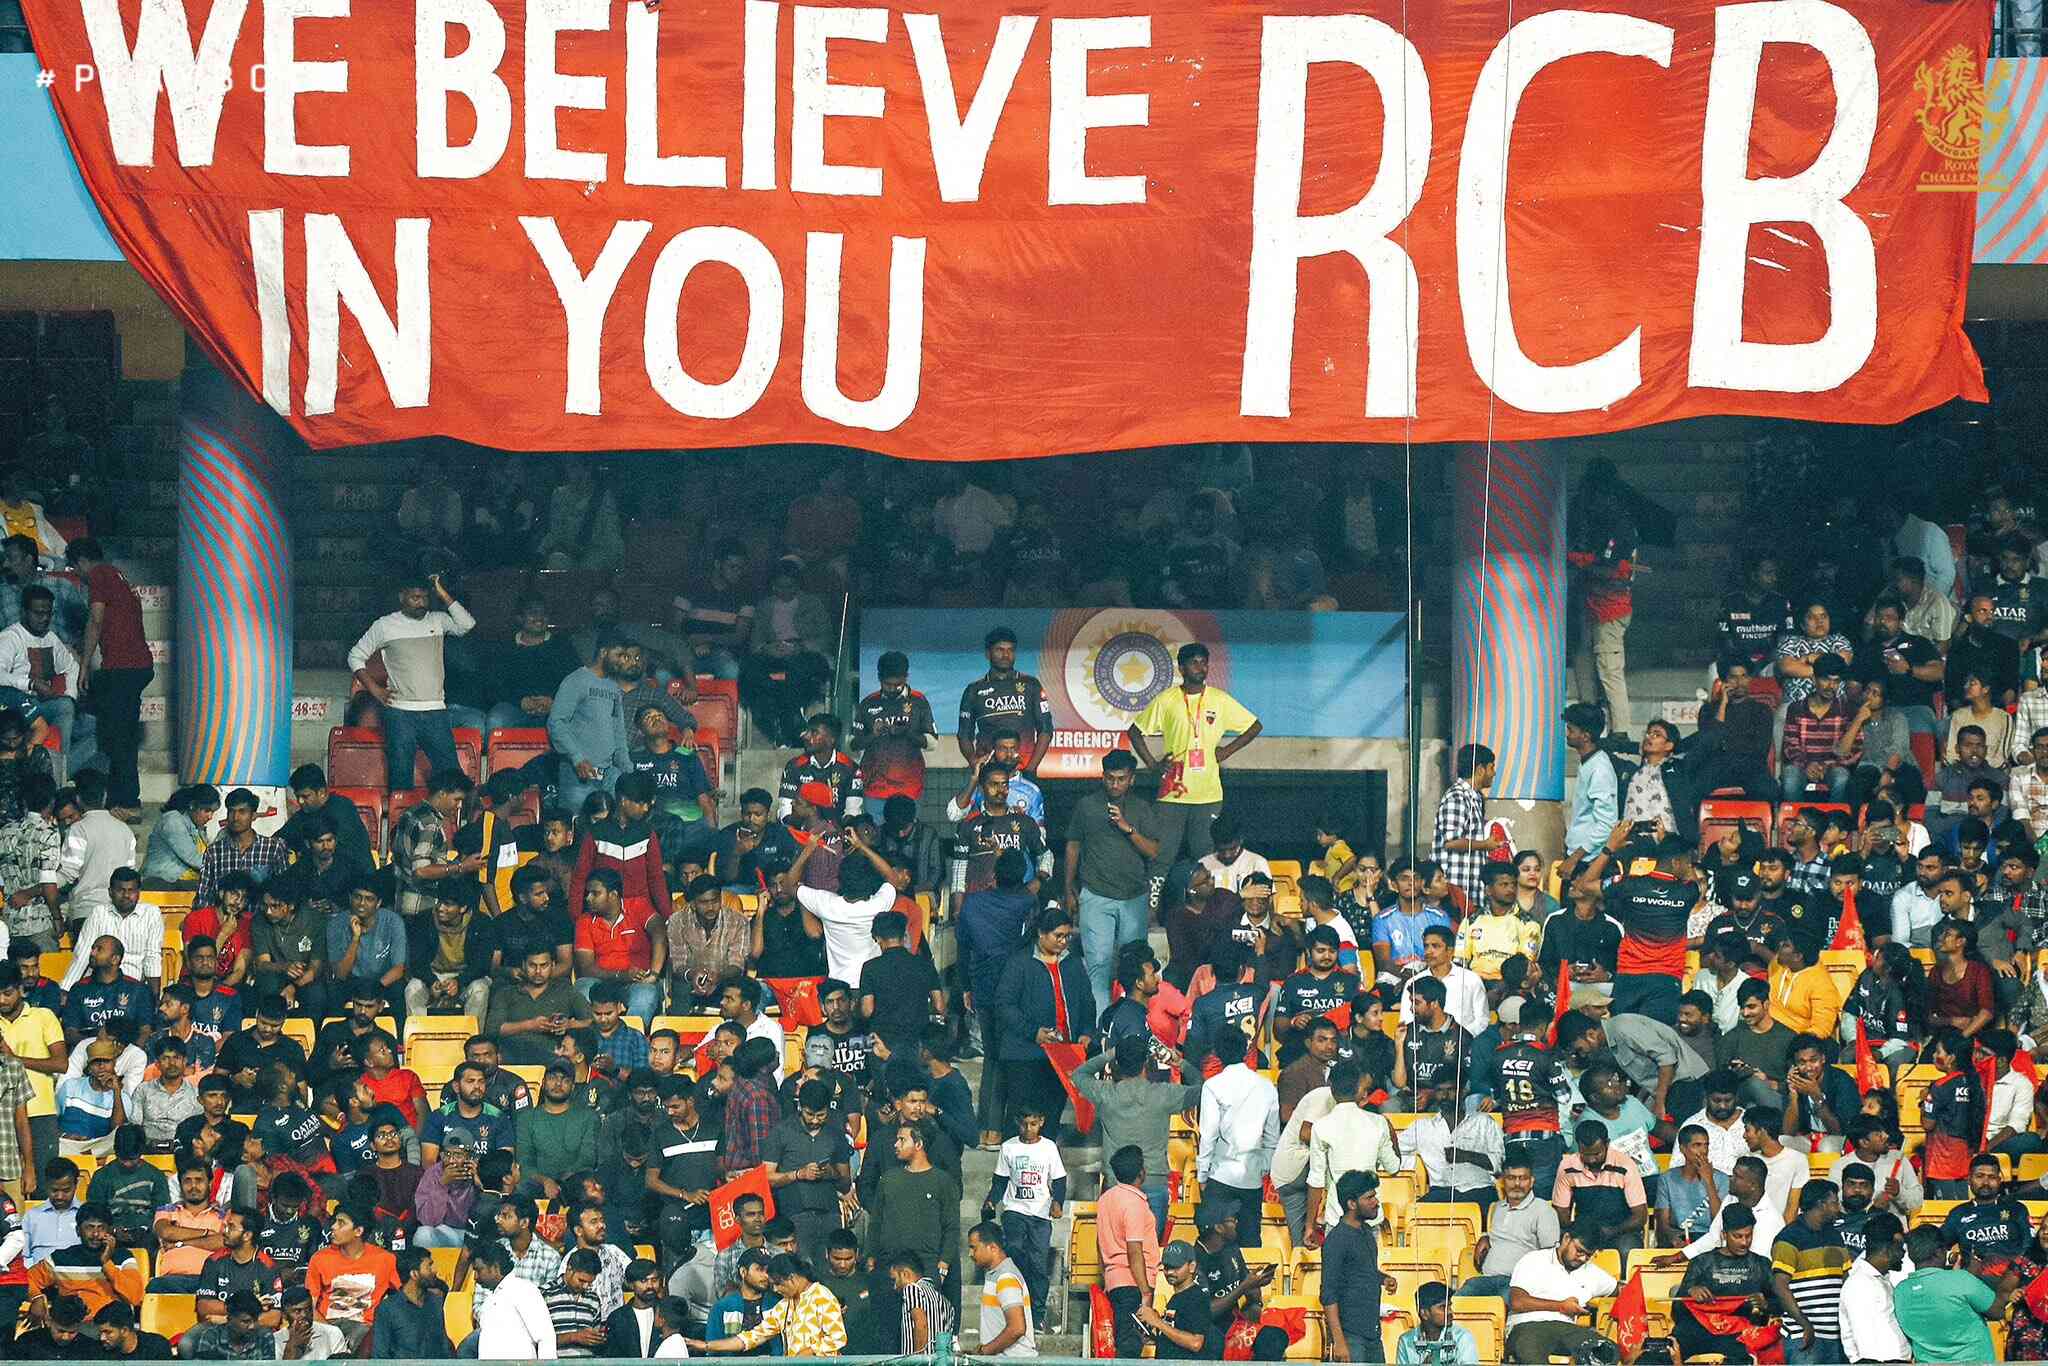 RCB fans at M. Chinnaswamy today (X.com)